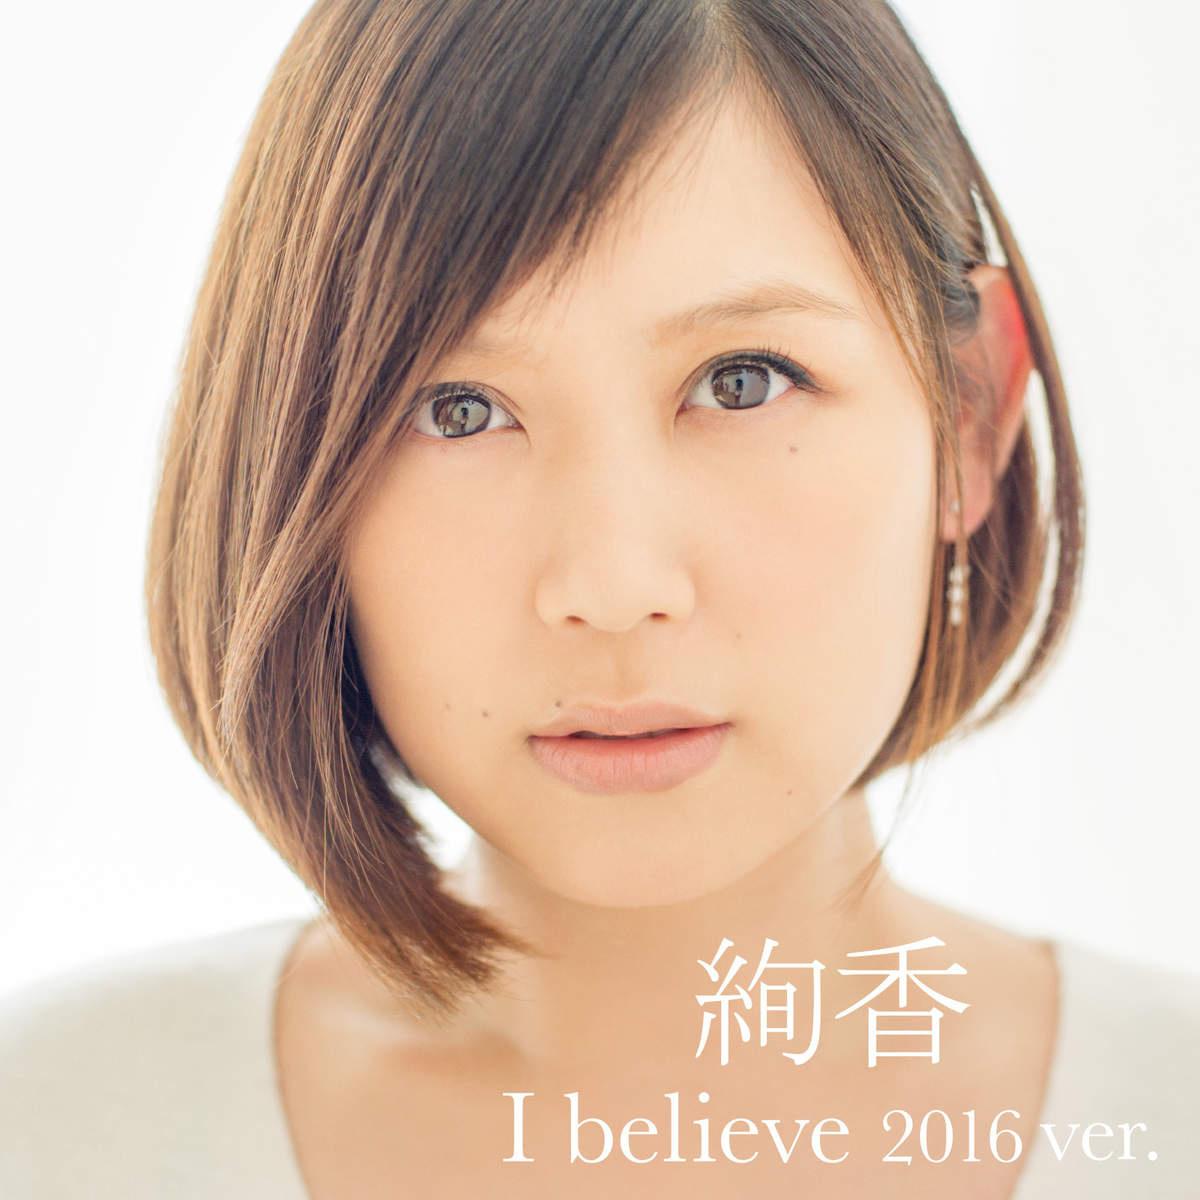 I believe 2016 ver. from THIS IS ME xuan xiang 10th anniversary BEST